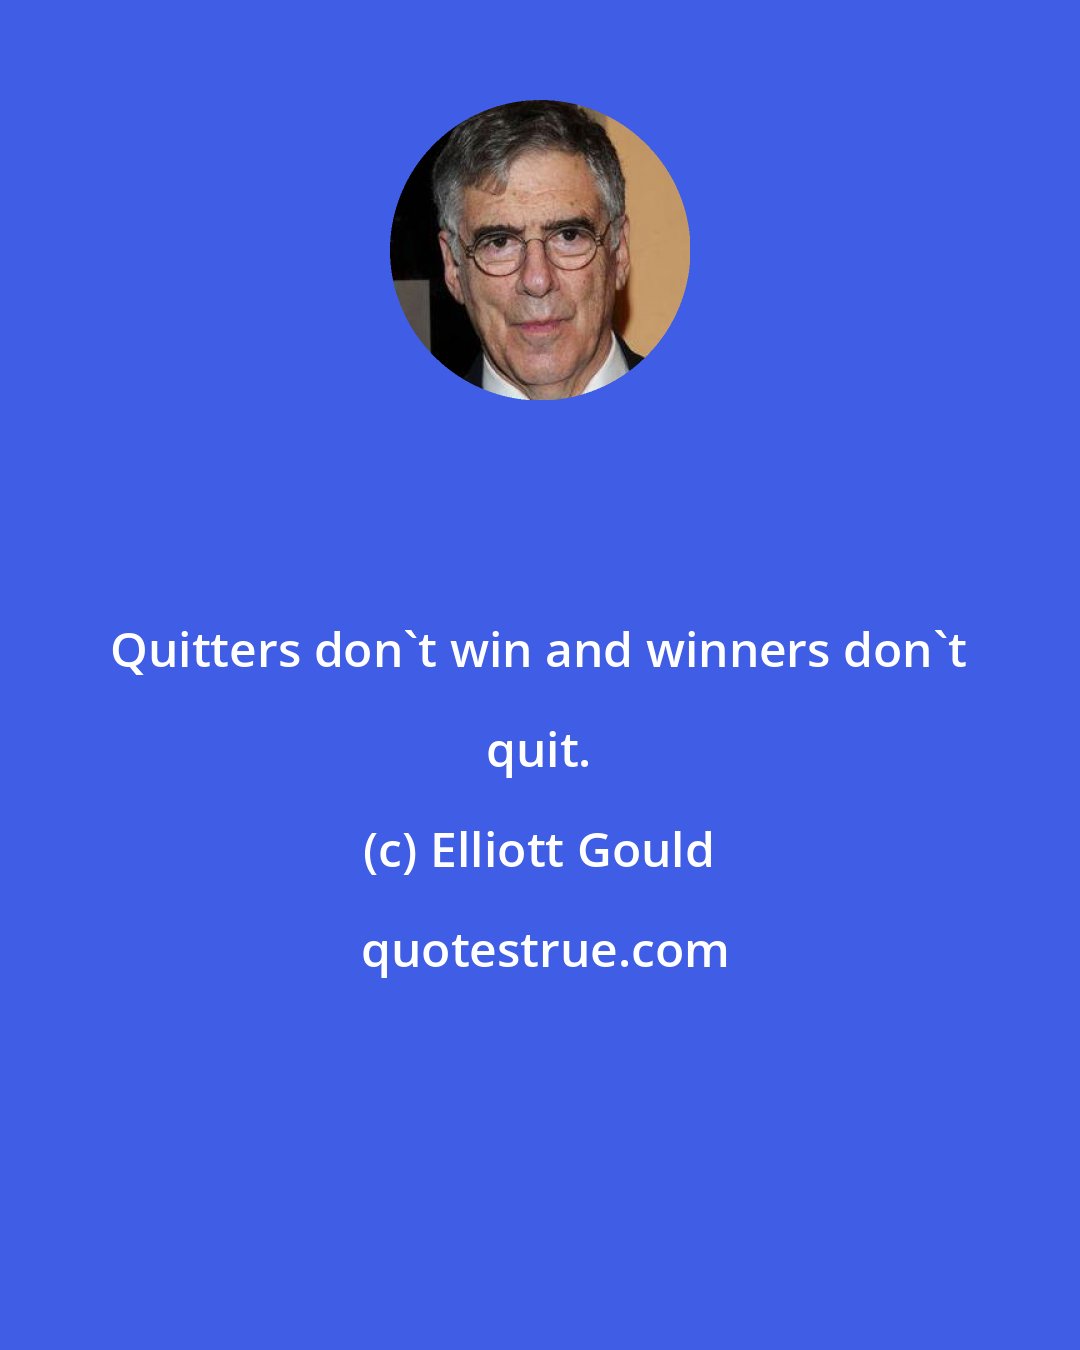 Elliott Gould: Quitters don't win and winners don't quit.